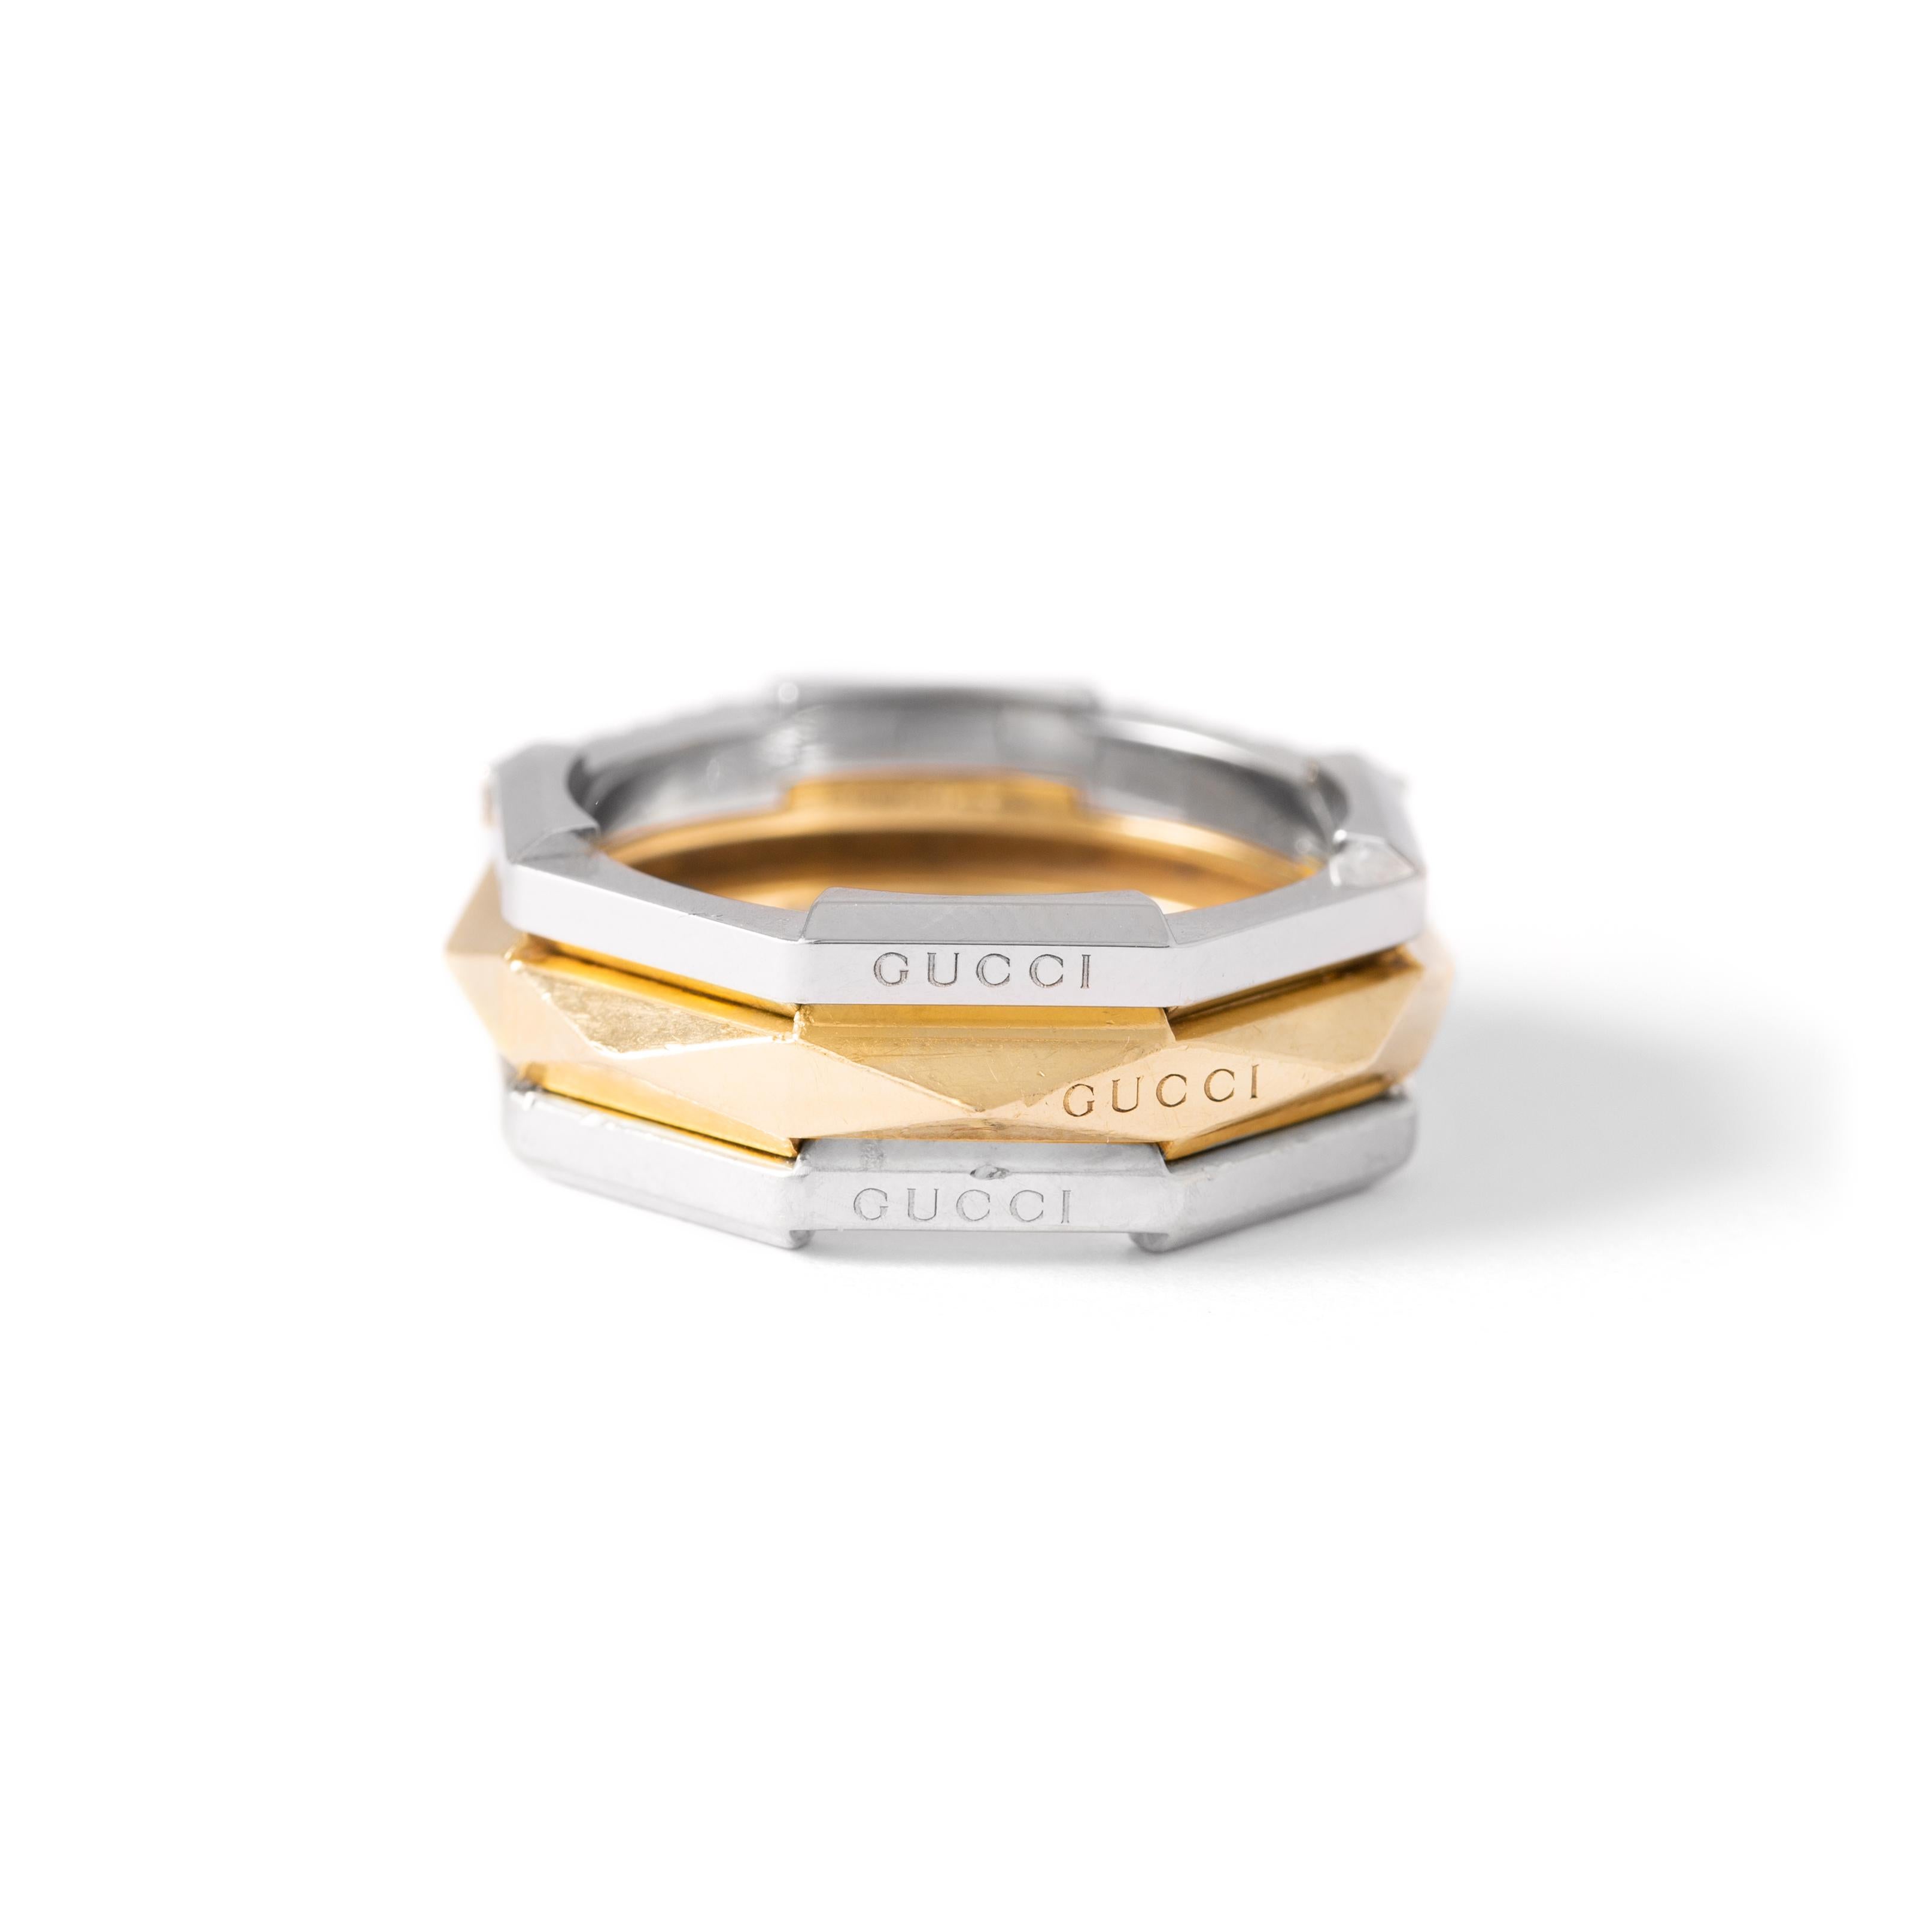 Three Gucci Link to Love Mirrored Rings Stackable respectively 
18K Yellow Gold, 18K White Gold and Diamond on 18K White Gold.

Comes with three Gucci boxes.

Each one signed Gucci.
Made in ITALY.

A bold and influential ring design.
Stackable